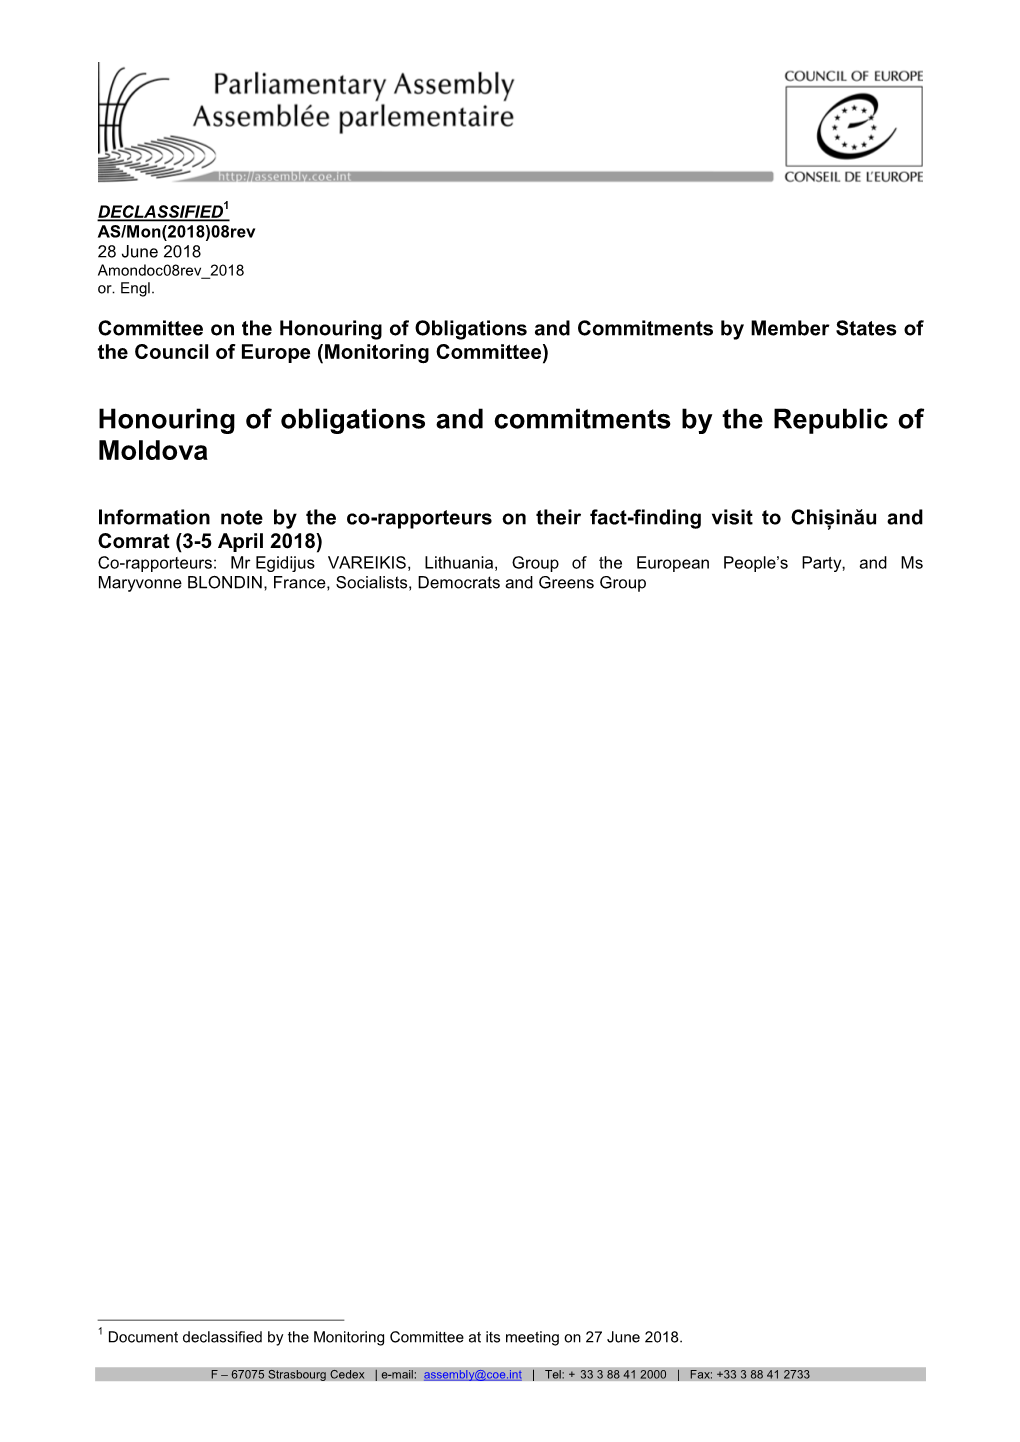 Honouring of Obligations and Commitments by the Republic of Moldova